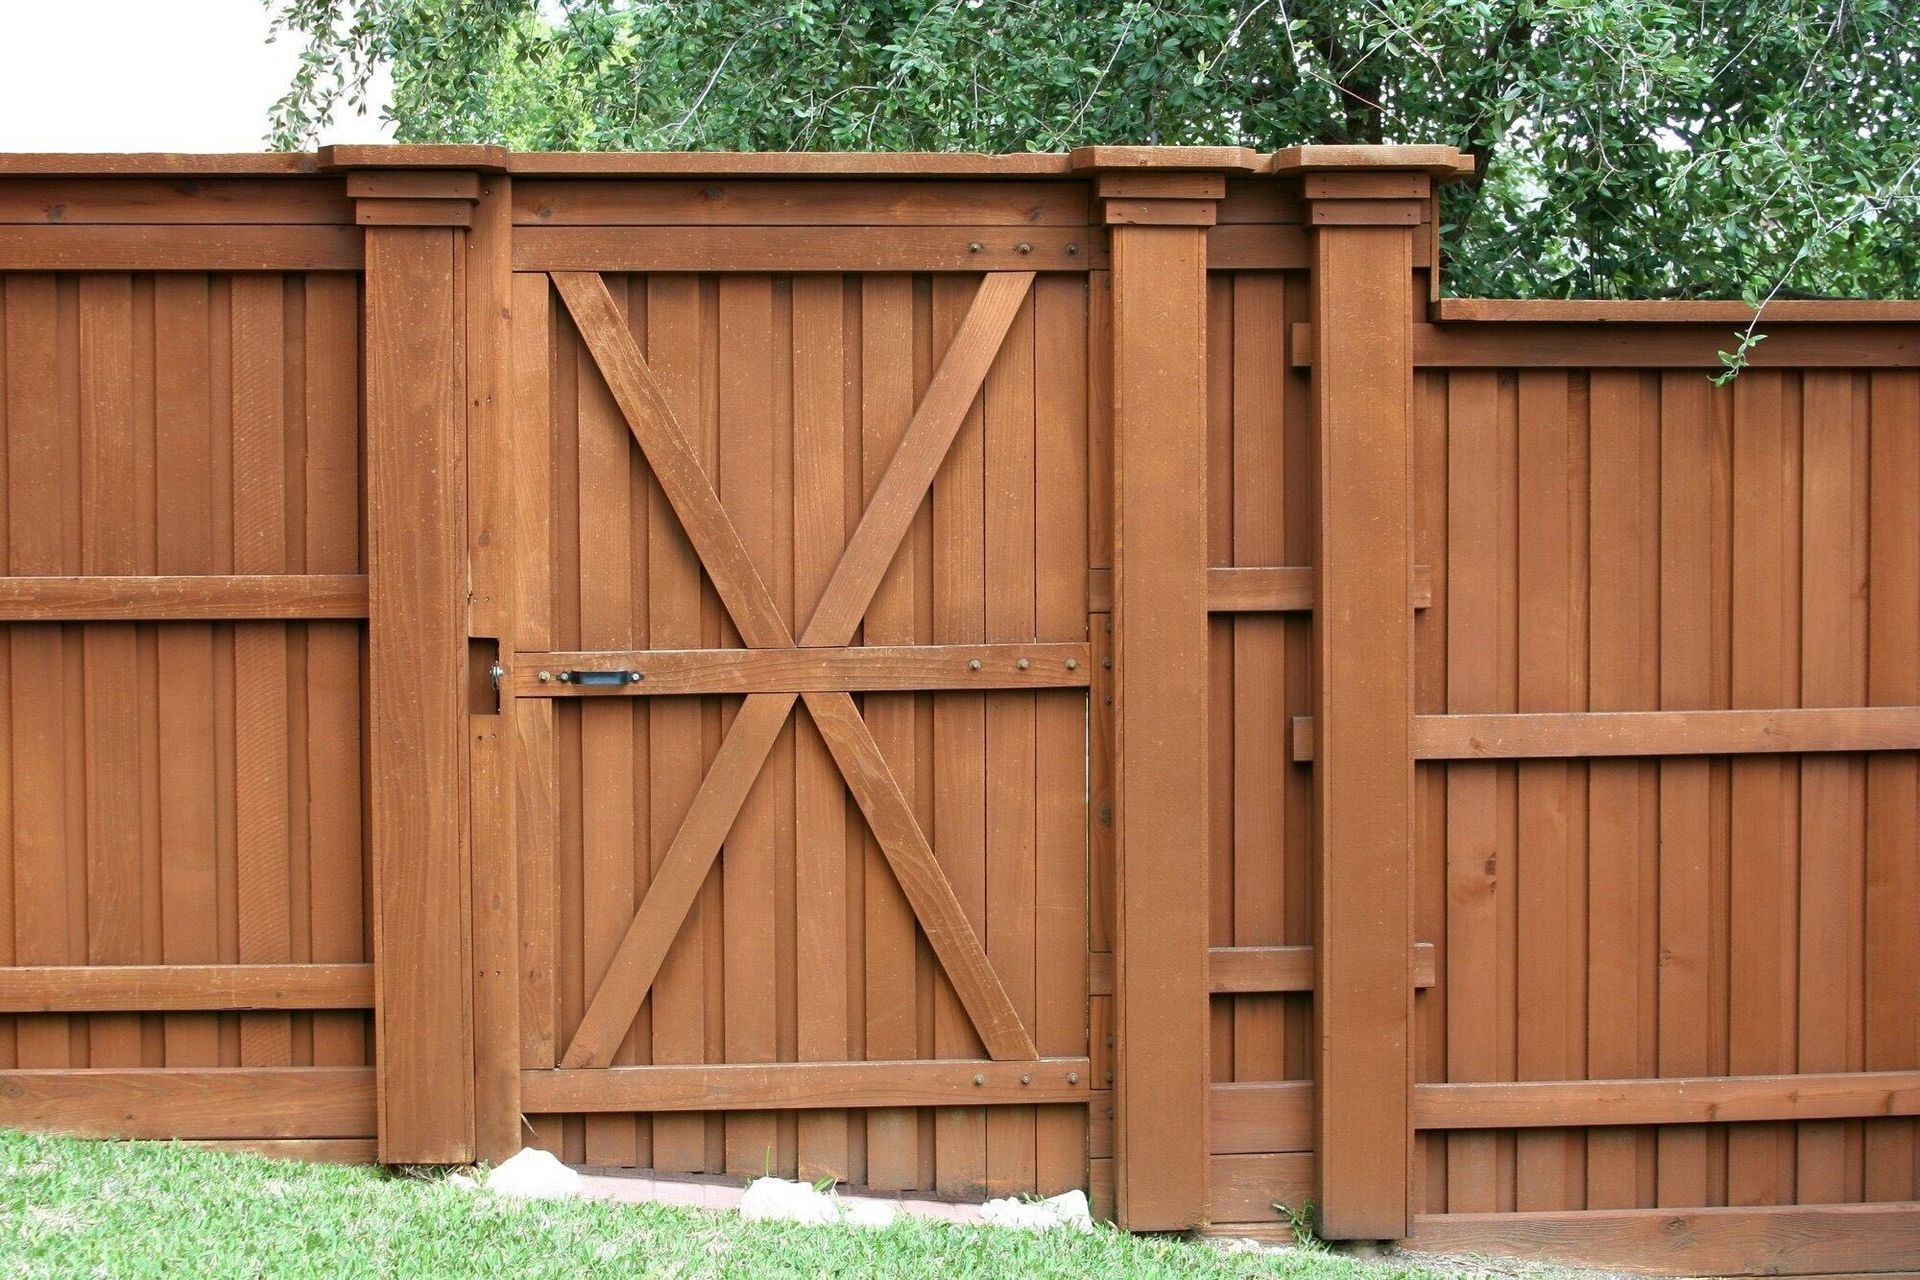 Modern wood fence - privacy and style for your yard